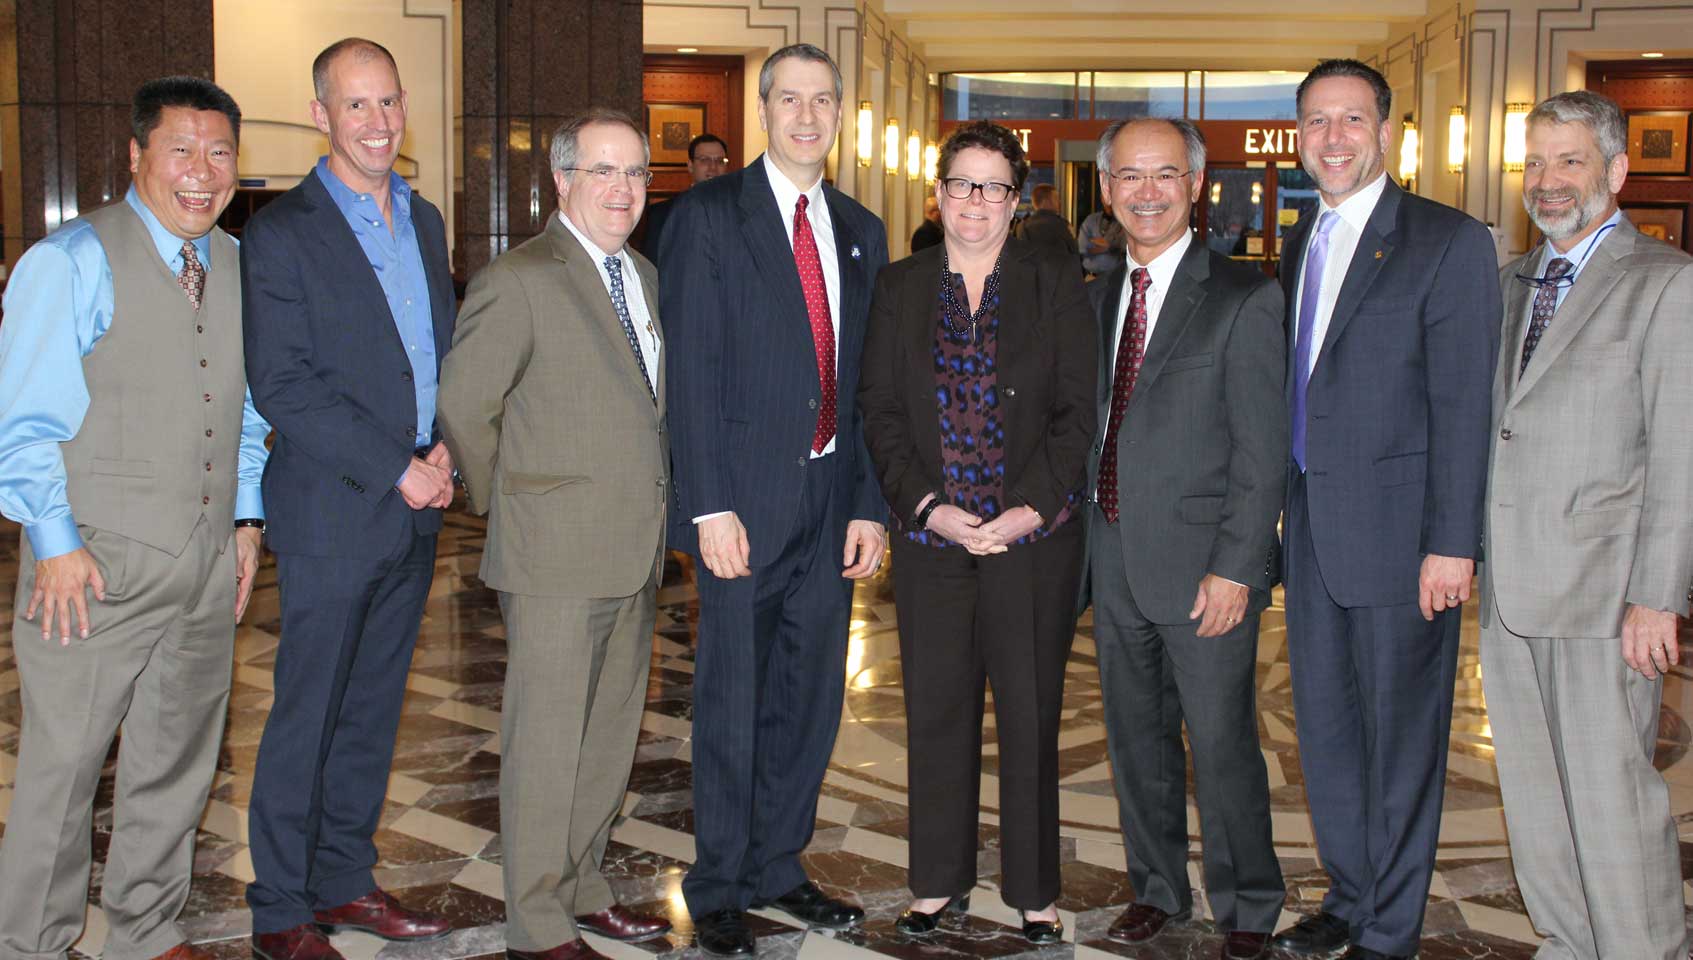 L-R: Sen. Tony Hwang, R-28; PIA National Director and PIACT past President Timothy G. Russell, CPCU; PIACT Member John Walsh; 2016 PIACT Legislator of the Year Rep. Brian Becker, D-19; Insurance Commissioner Katharine L. Wade; PIACT past President Augusto Russell, CIC; PIACT past President Howard S. Olderman; and PIACT past President James R. Berliner, CPCU.